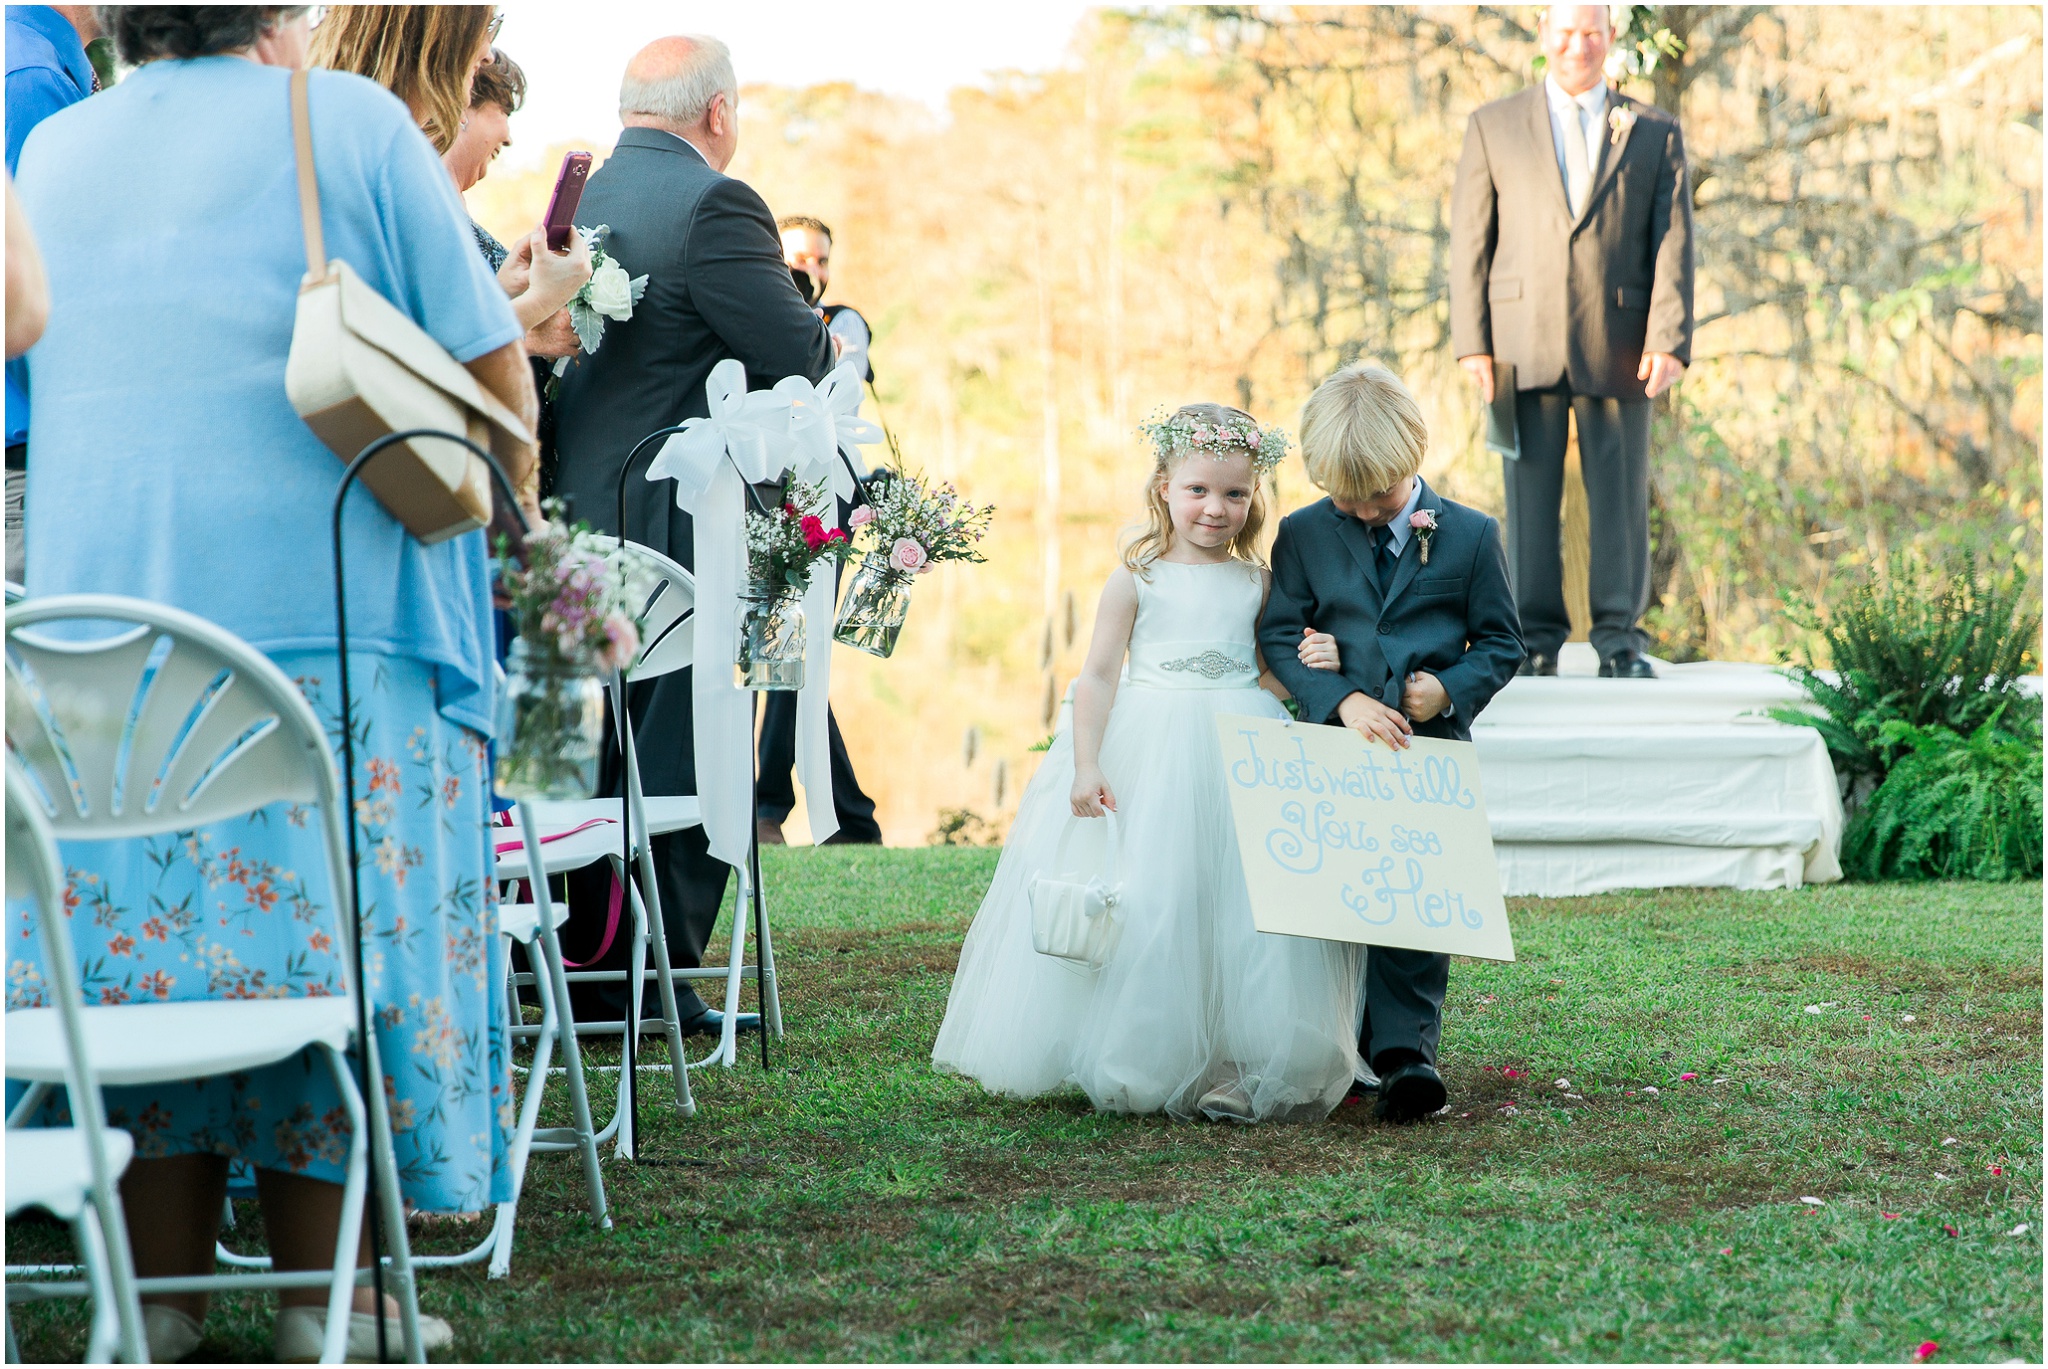 Ringbearer and Flower girl bashfully walking up the aisle, Paige and Dorsey, Upper Mill Plantation Wedding Session 20, Conway, South Carolina, Wedding coordinator, flowers and Cake - Willow Event Designs, Venue - Upper Mill Plantation, DJ - Carolina Entertainment, Dress - Foxy Lady, www.onelifephoto.net Photography